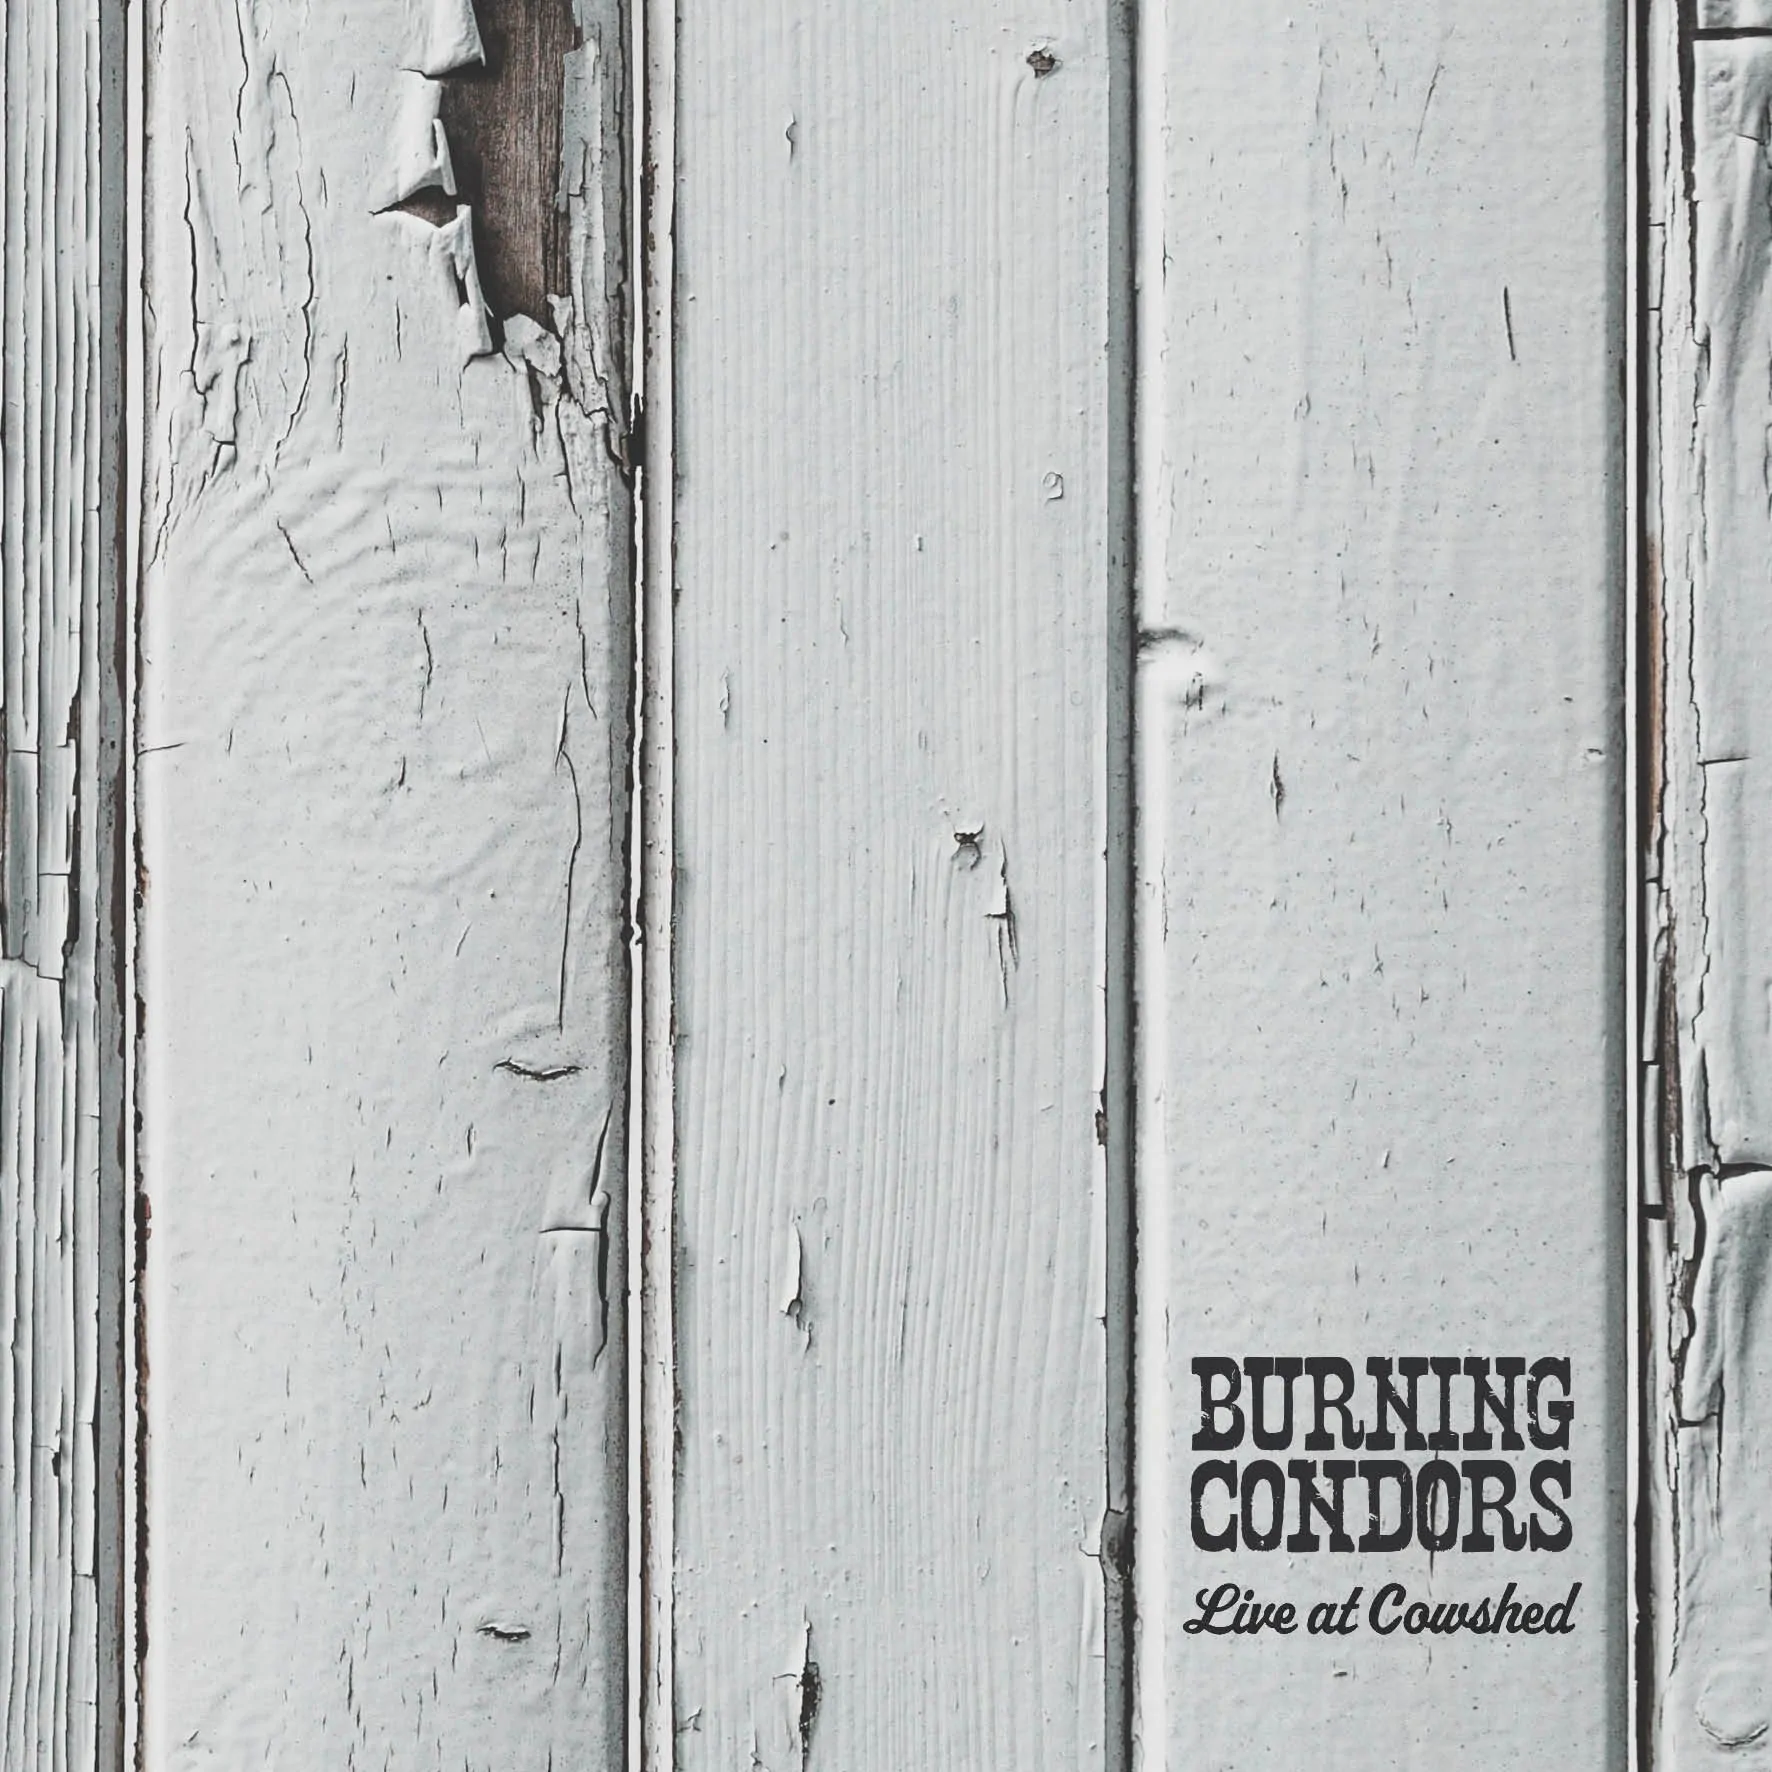 ALBUM REVIEW: Burning Condors - Live at Cowshed 